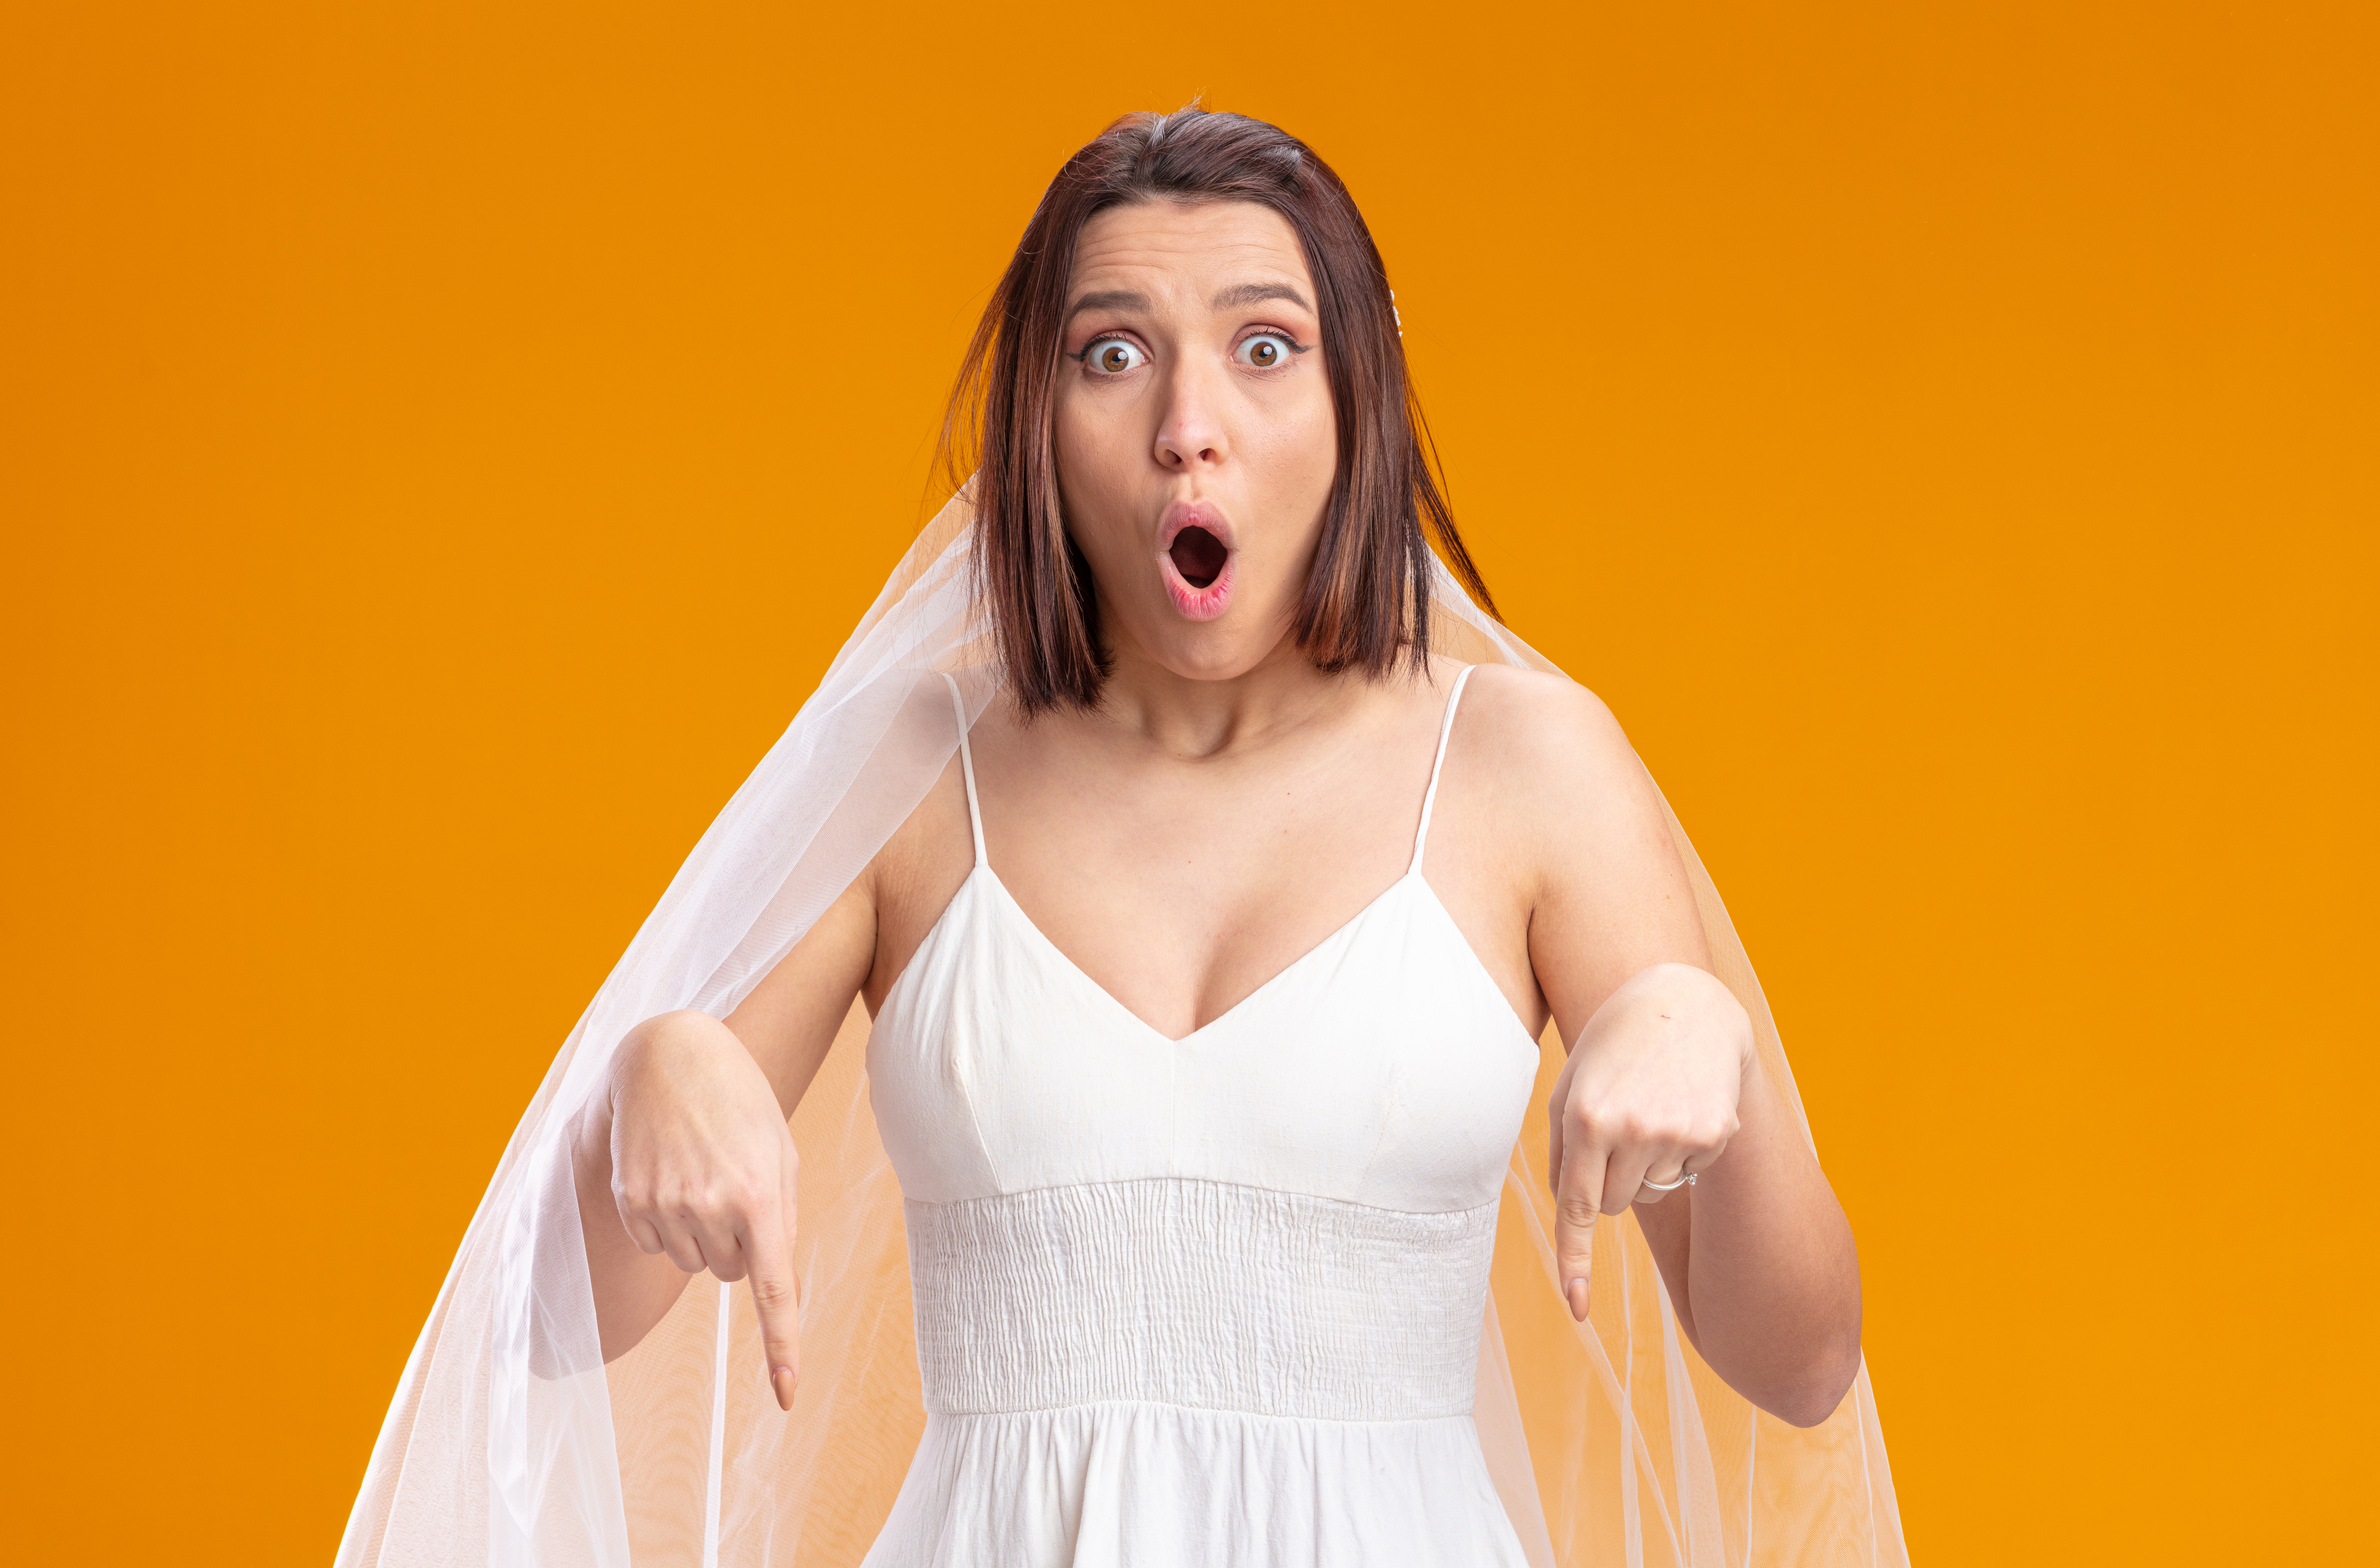 Bride looking amazed while pointing down | Source: Freepik